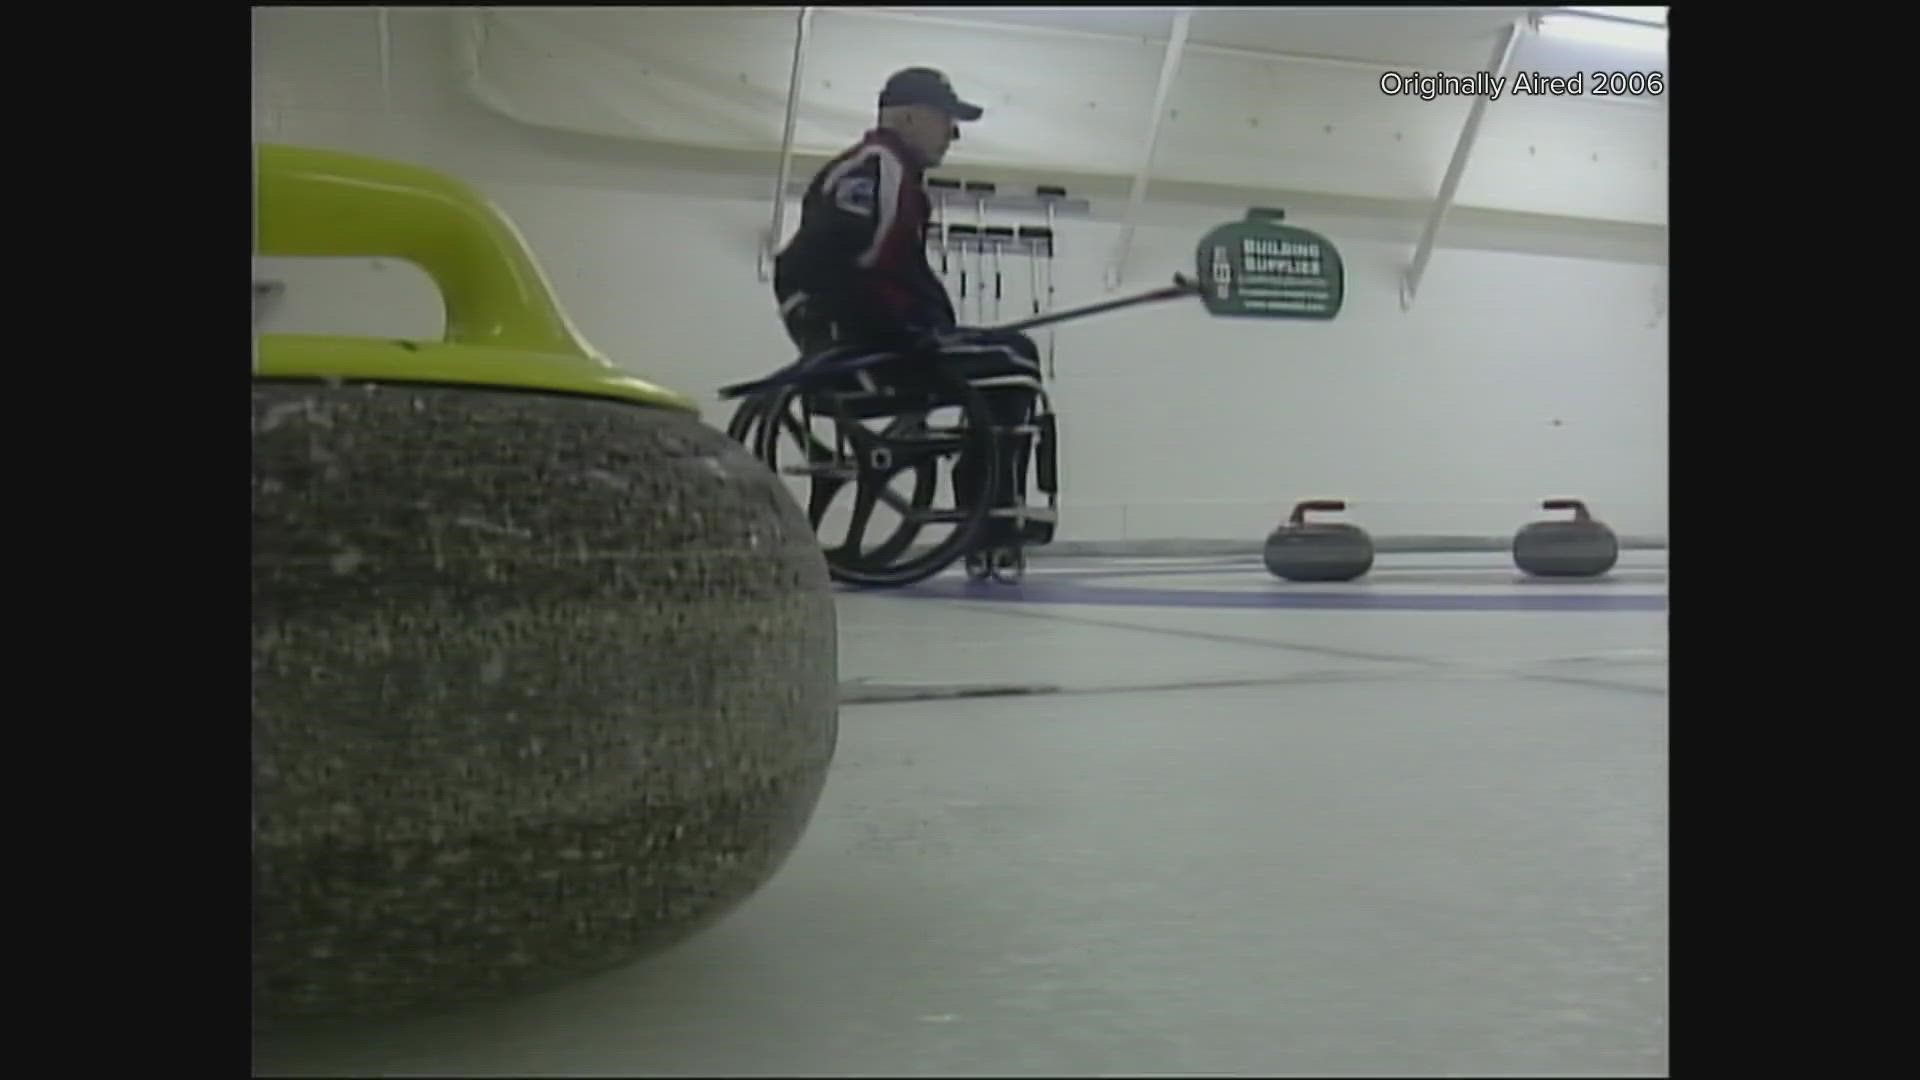 After years of practicing, Wes Smith of Glenburn made the Paralympic team.